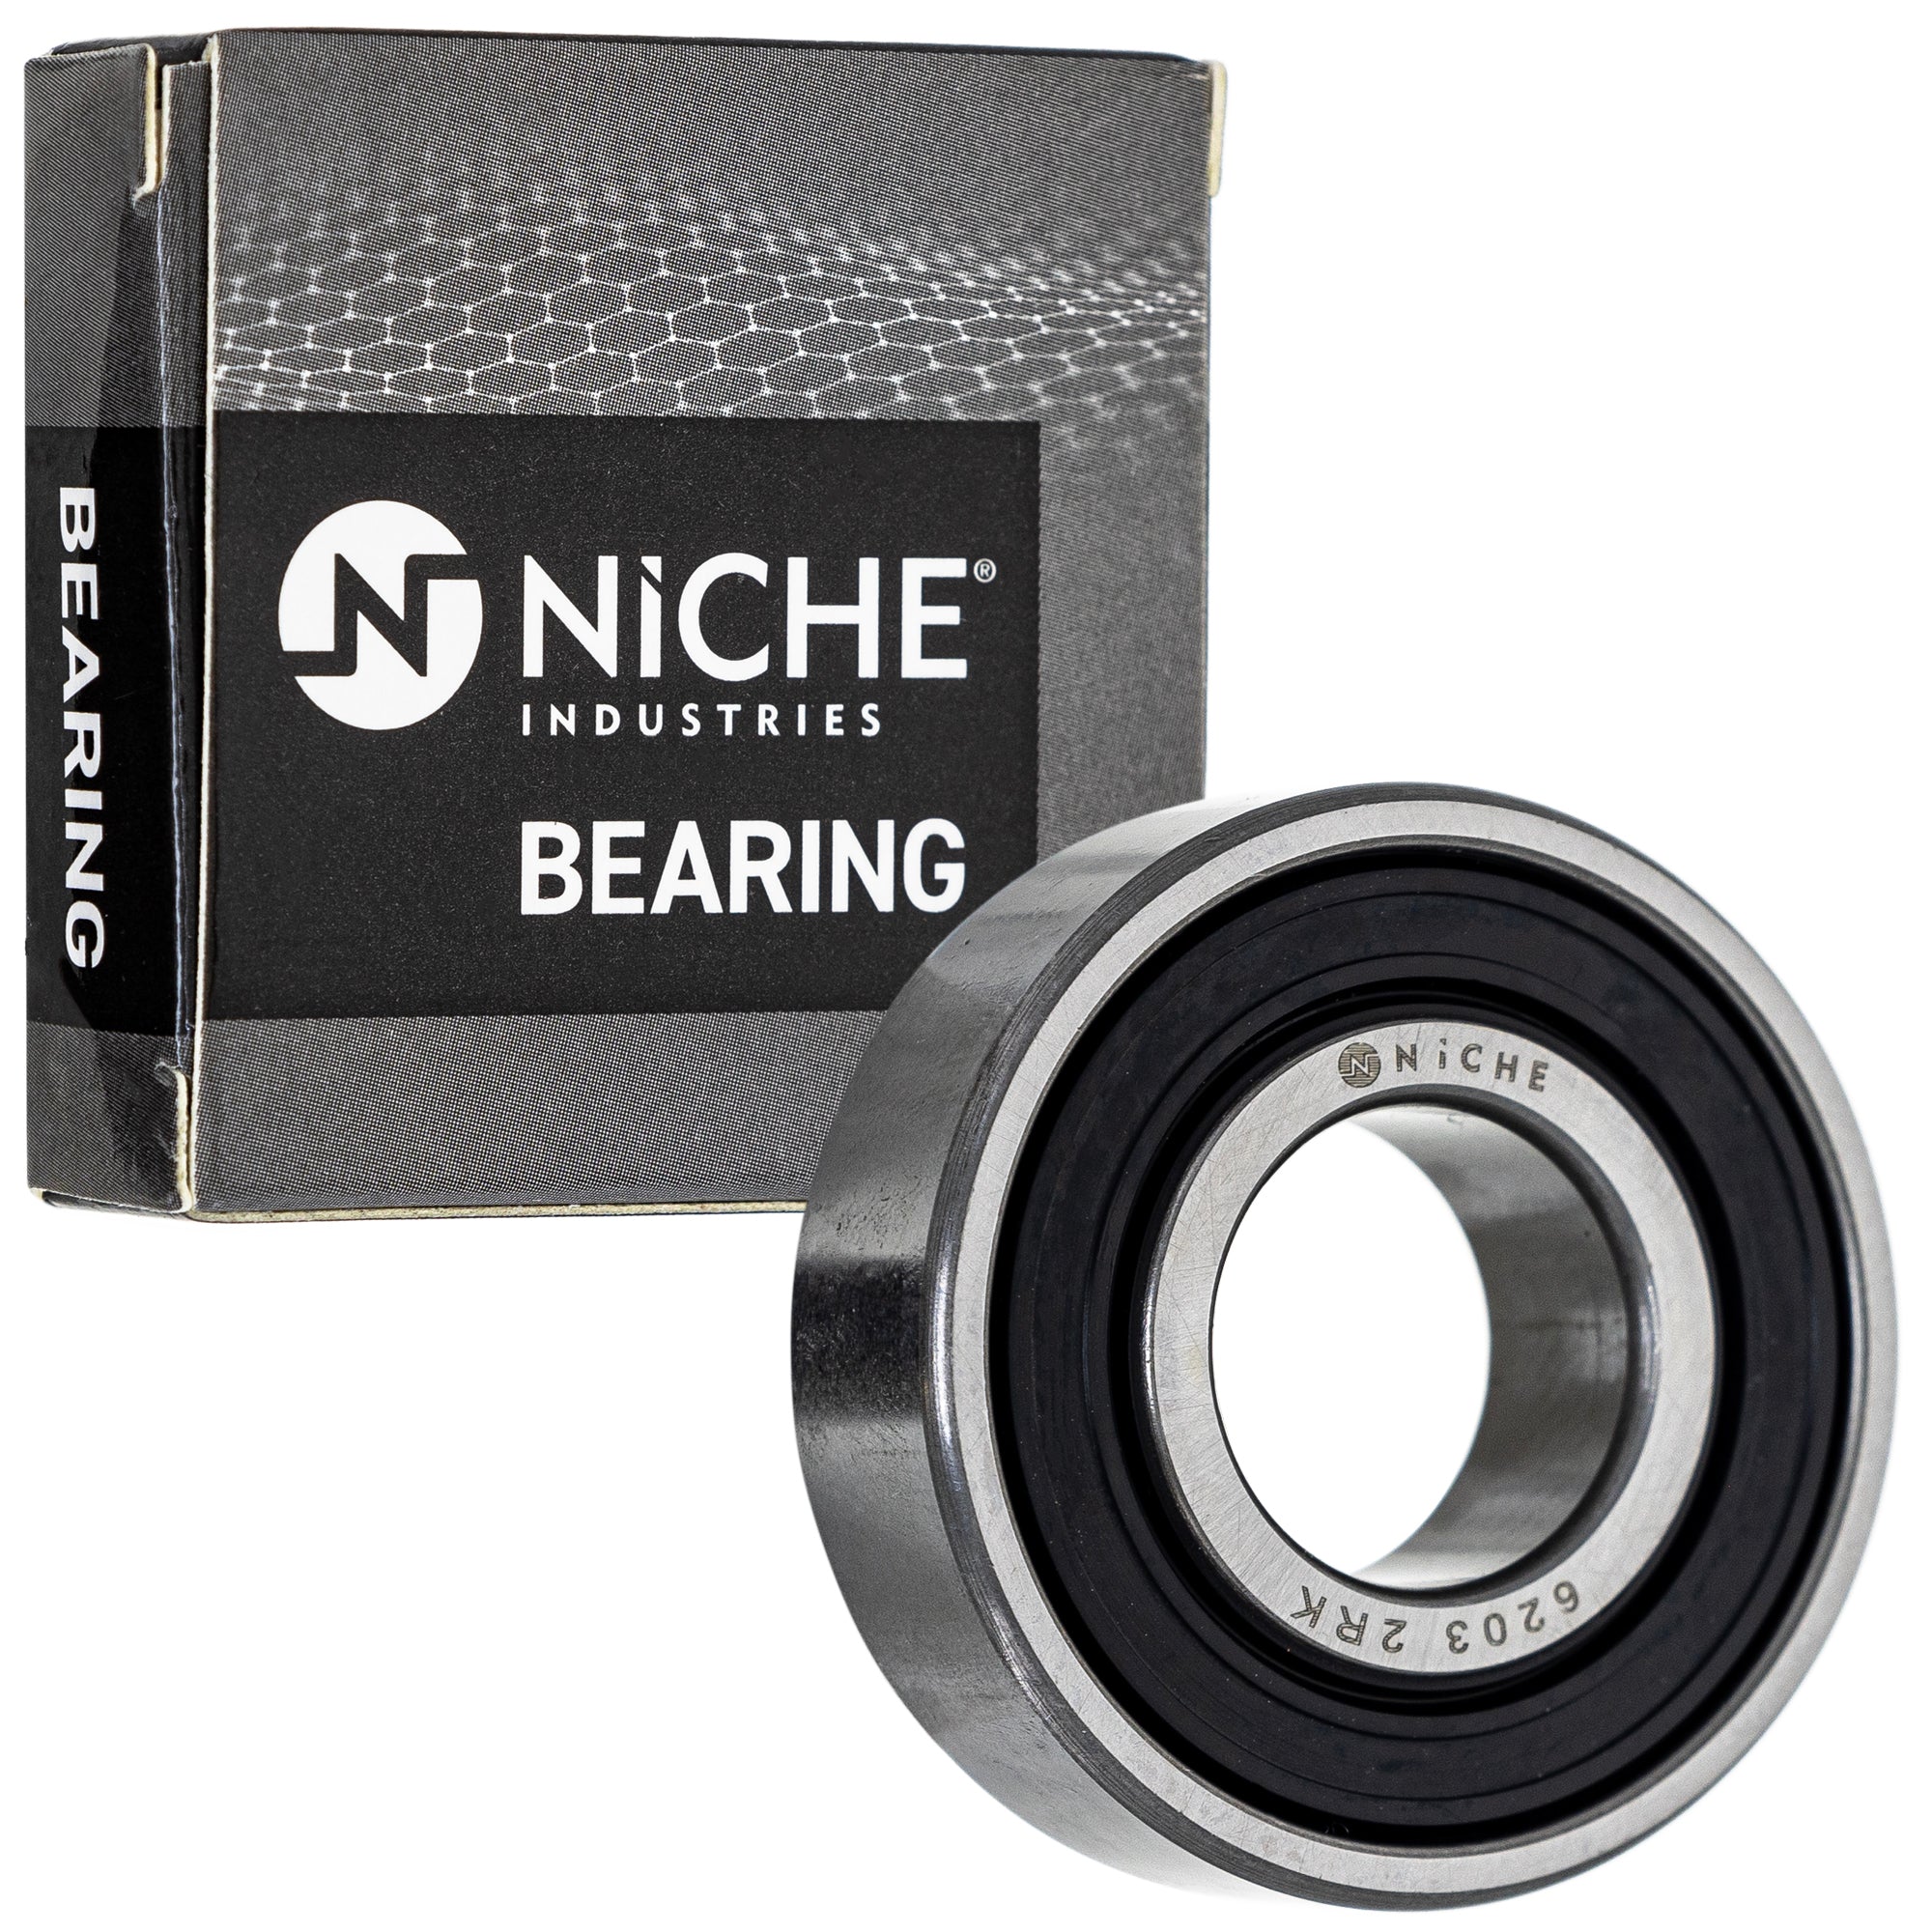 NICHE 519-CBB2280R Bearing & Seal Kit 10-Pack for zOTHER SRX600 IT200